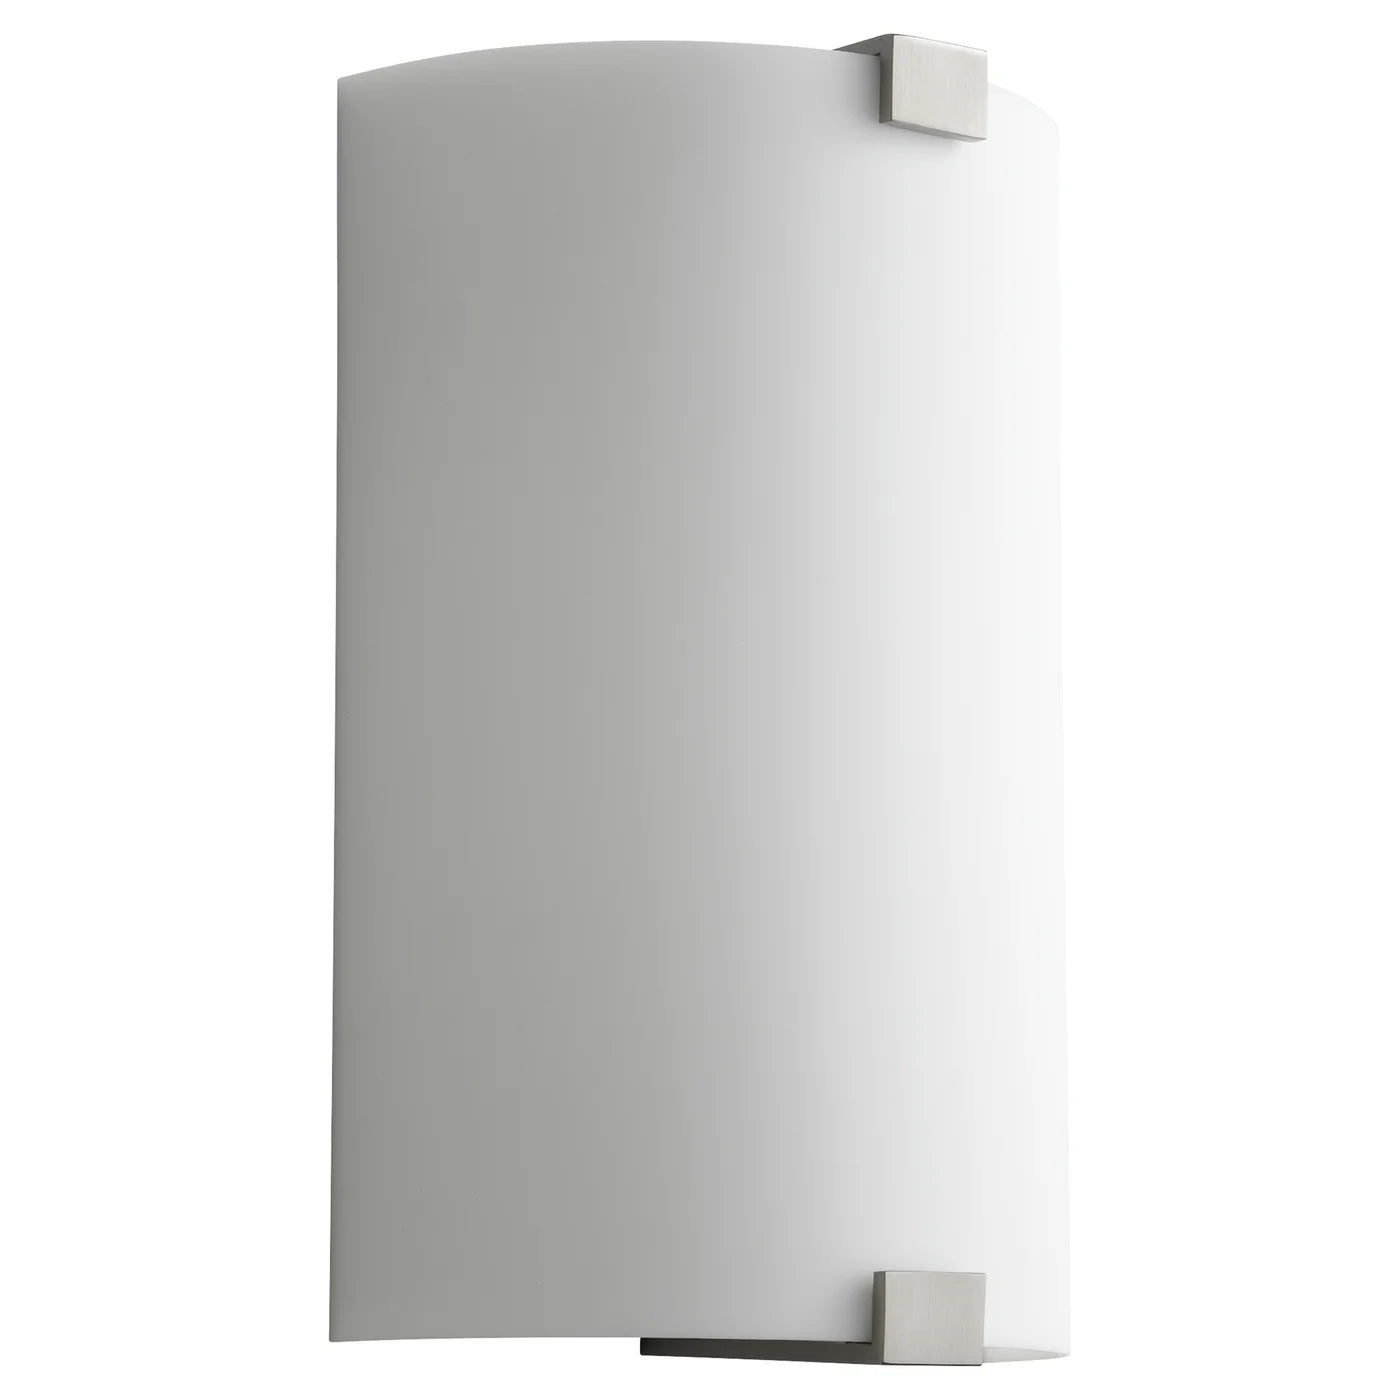 Oxygen Siren 3-563-224 LED Wall Sconce Light Fixture, ADA Compliant, Damp Rated - Satin Nickel